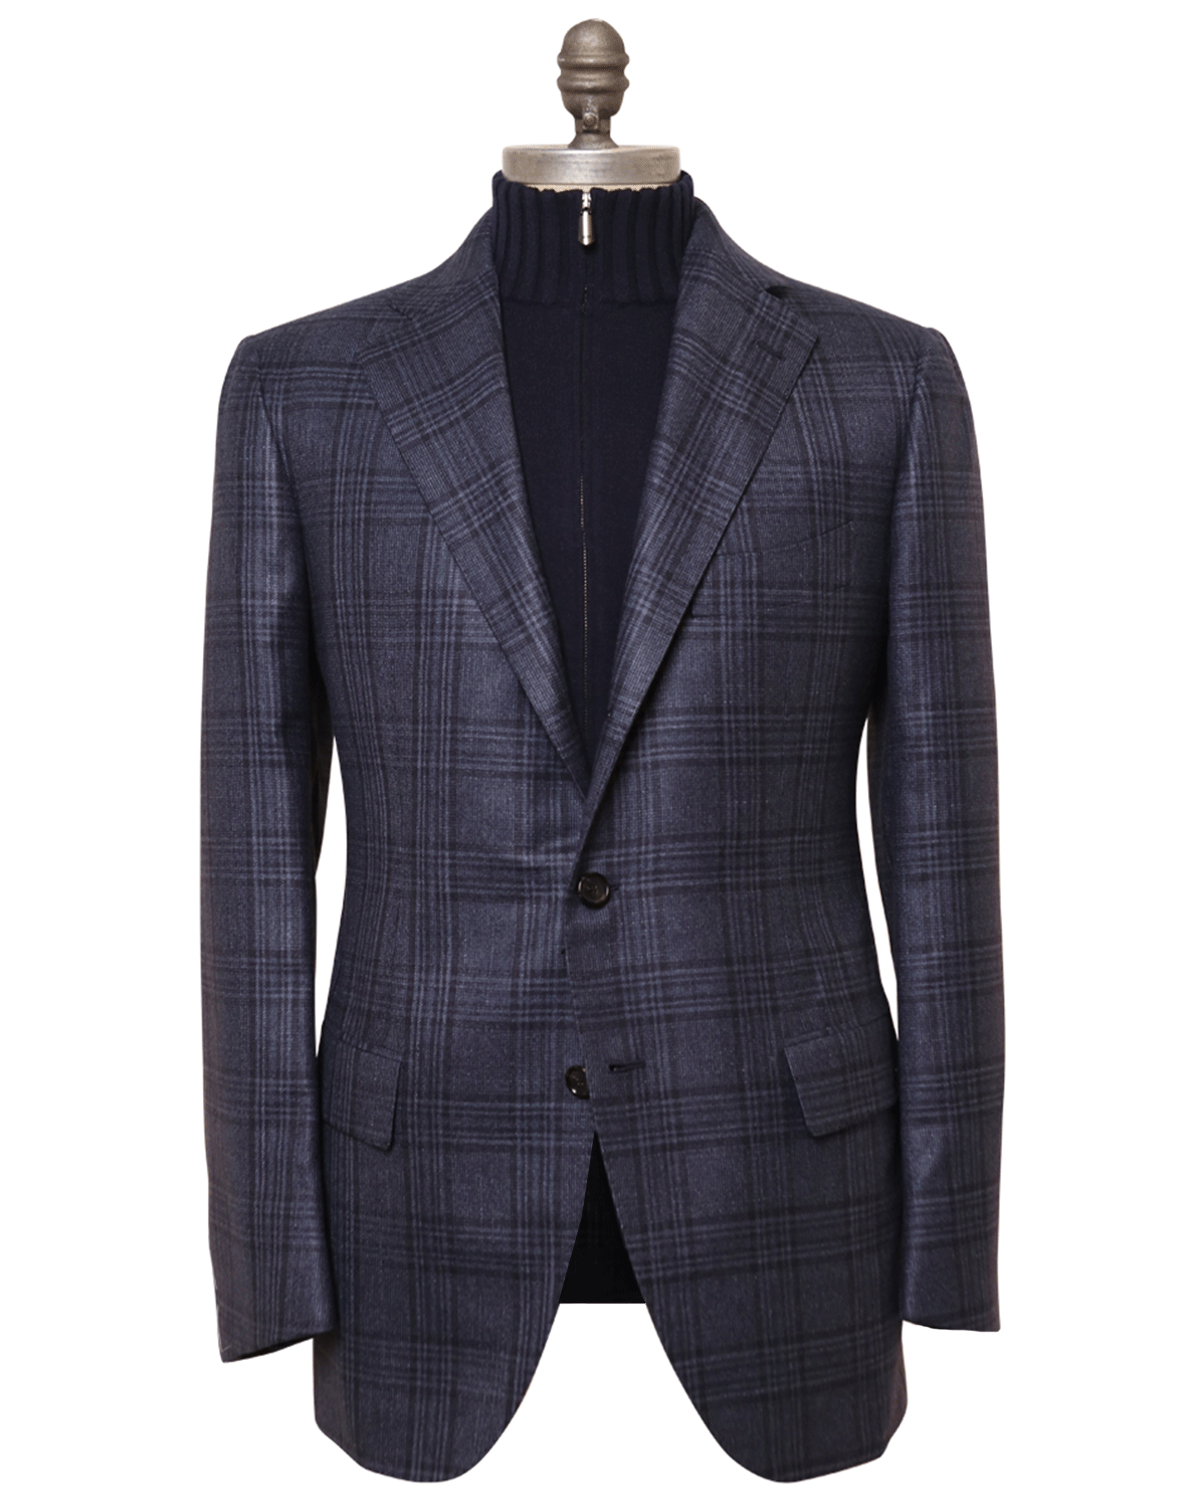 Blue and Navy Plaid Cashmere Blend Sportcoat